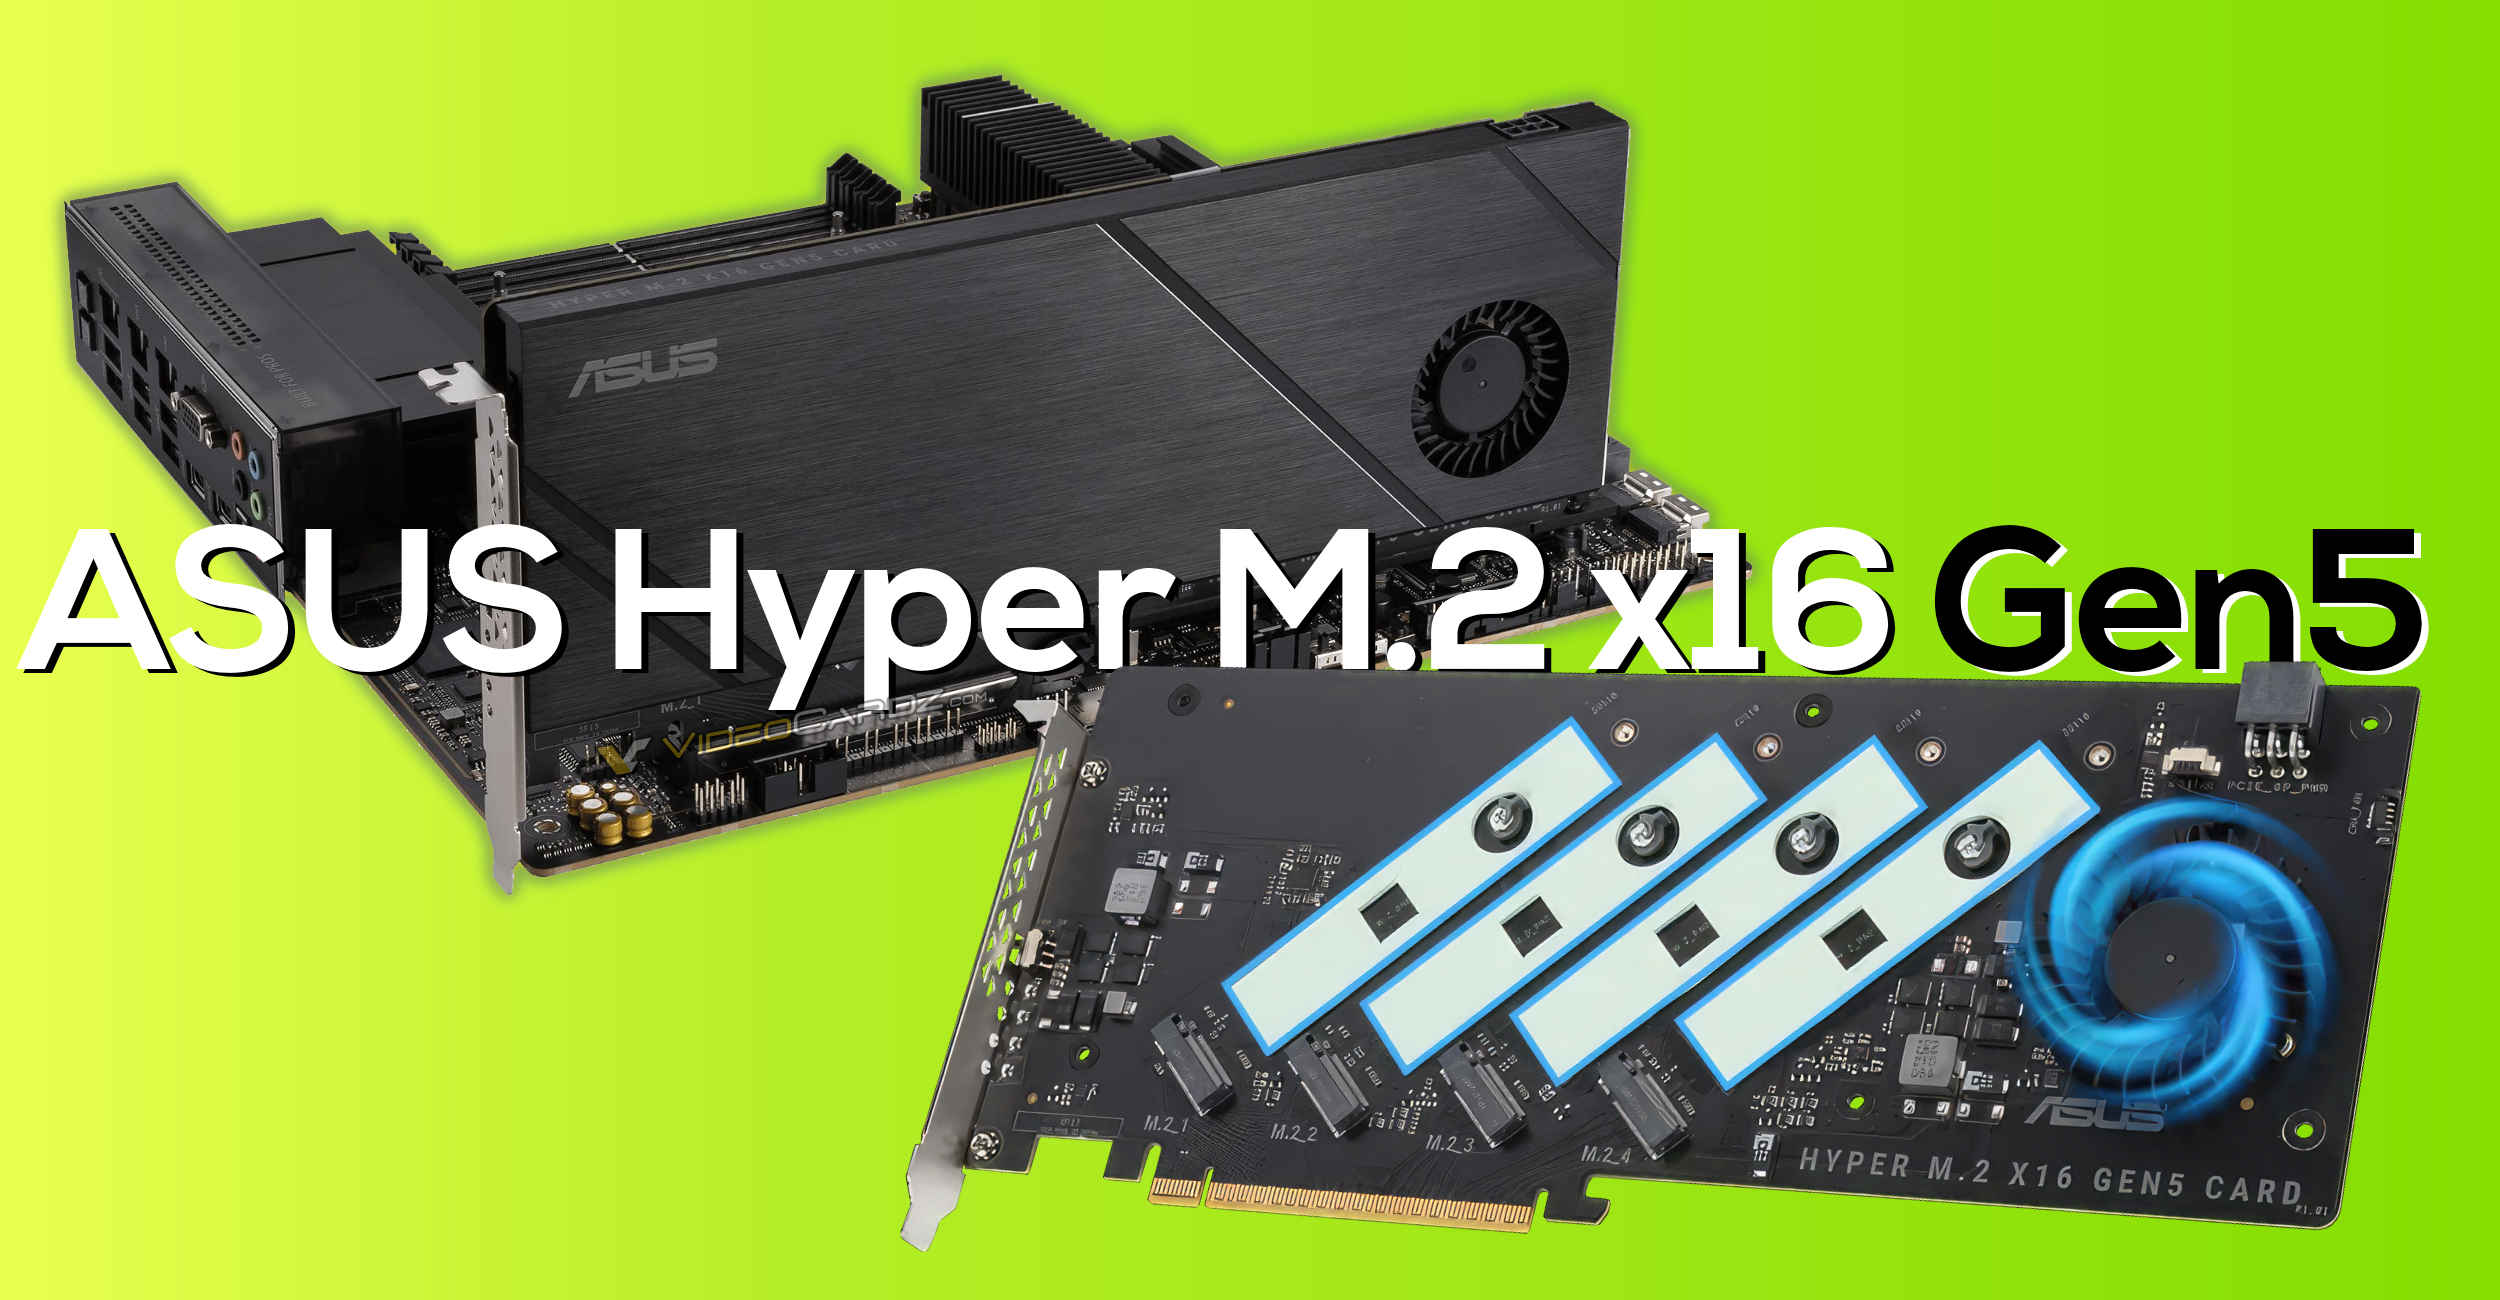 ASUS Hyper M.2 SSD Gen5 x16 expansion card announced, $79 price and up to 512 Gb/s bandwidth – VideoCardz.com